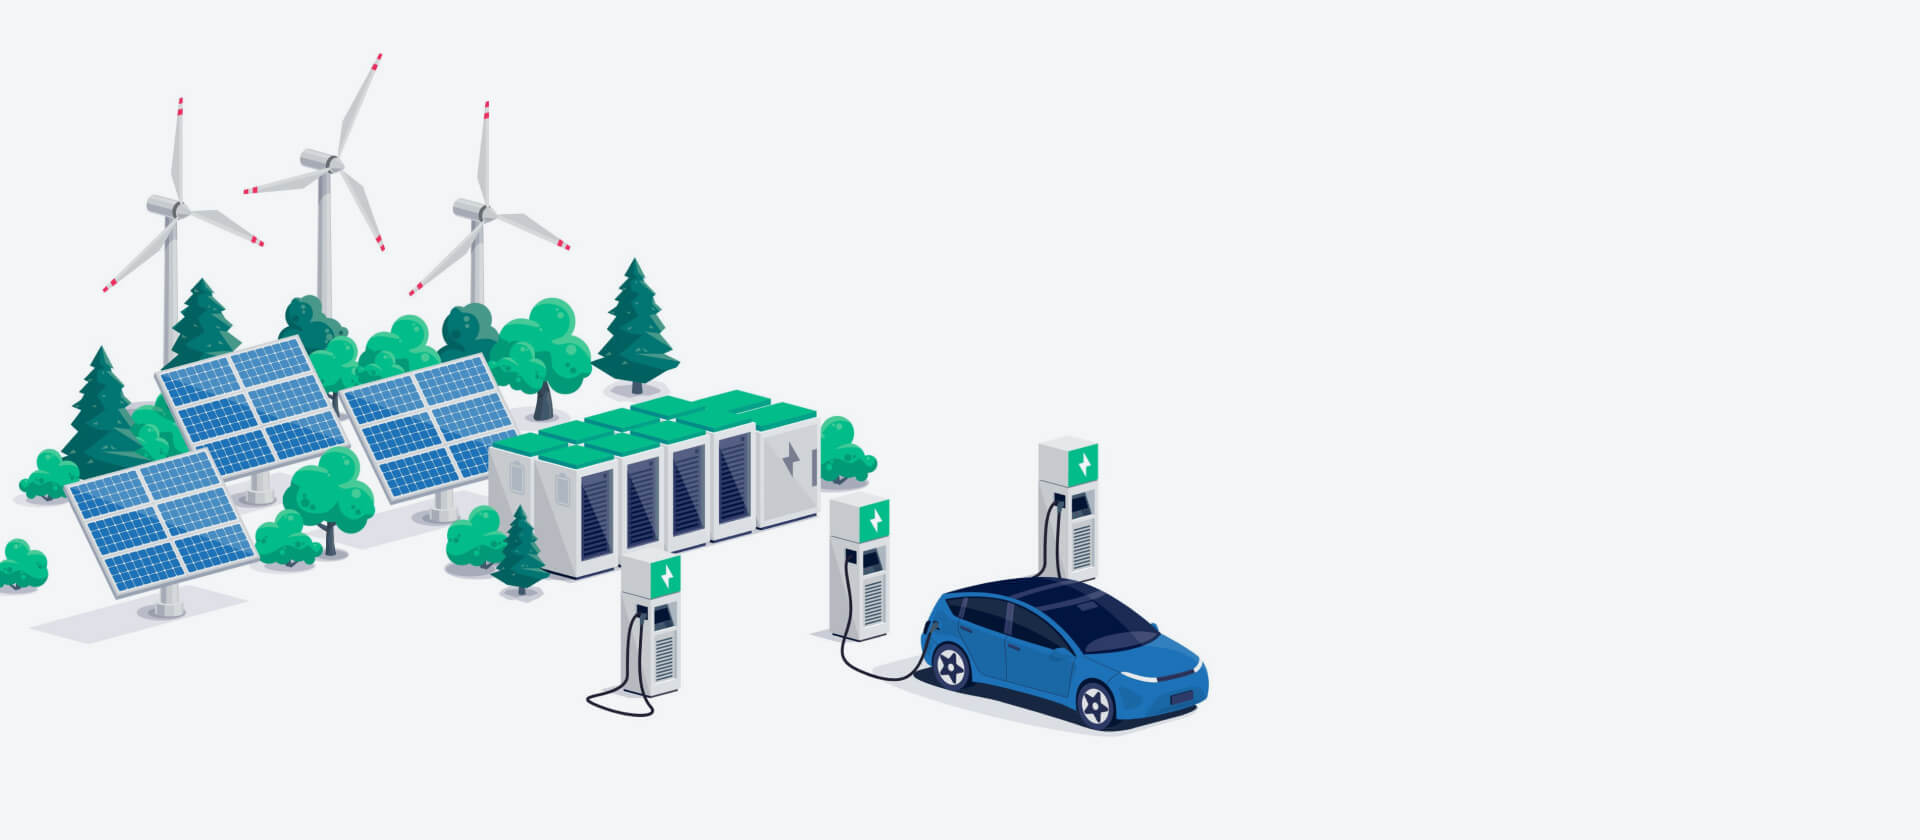 Paragon Mobility vision. A smart energy ecosystem, where electric vehicles are powered by renewable energies and surplus production is stored in battery storage units to balance the grid.